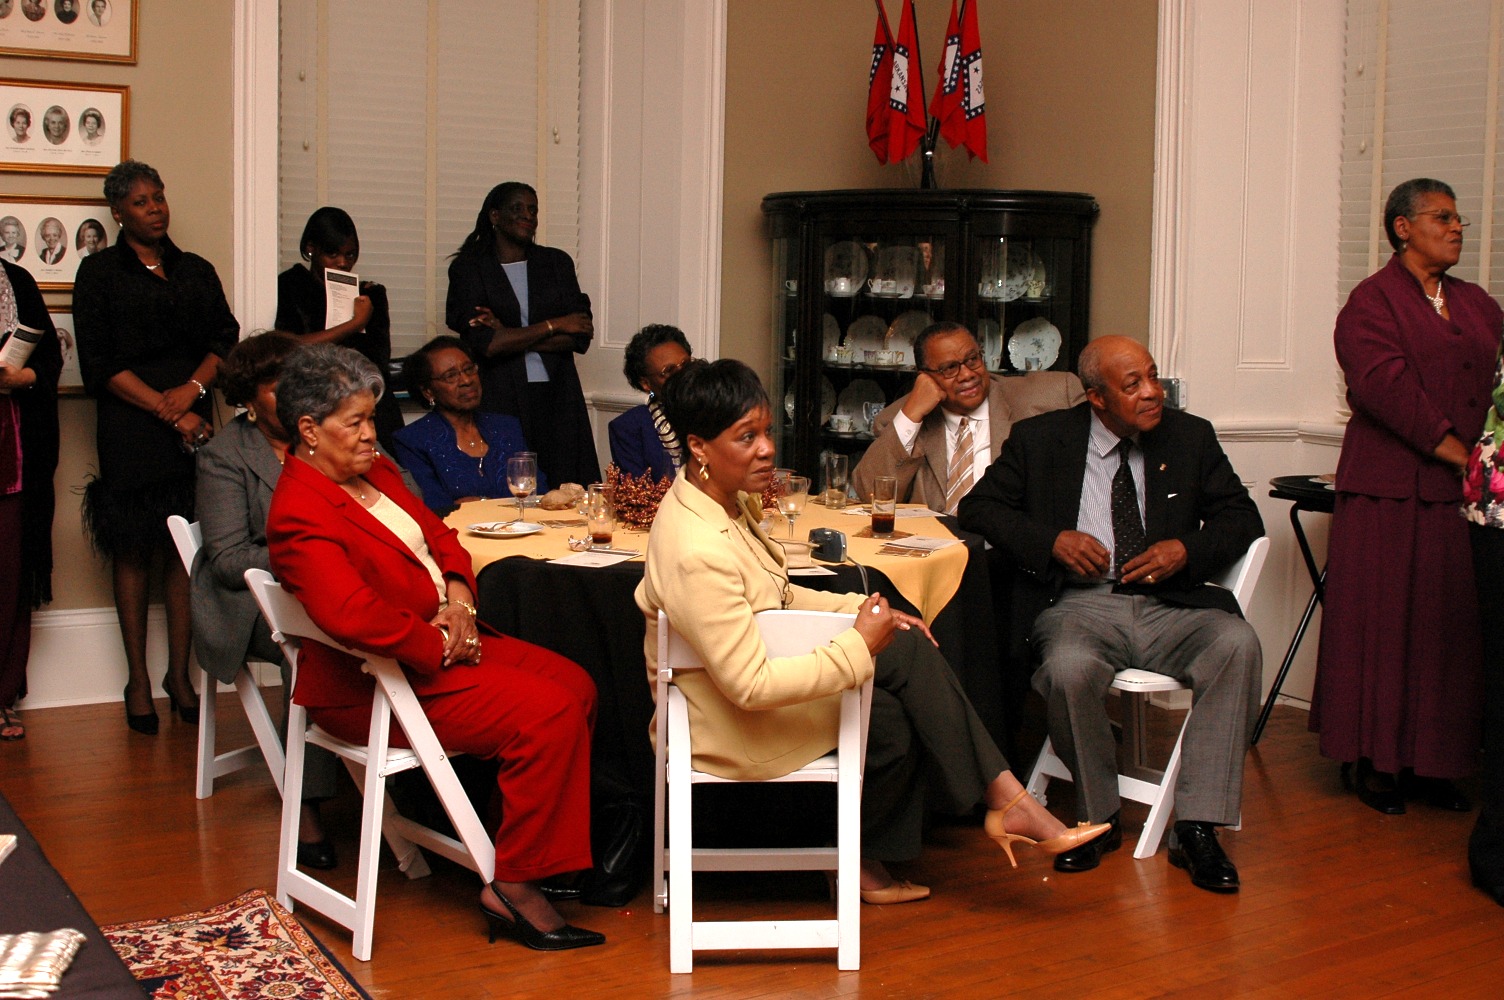 Guests at the Tuskegee Airman Awards presentation in 2005 in the MacArthur Museum of Arkansas Military History, located at the birthplace of General Douglas MacArthur in Little Rock